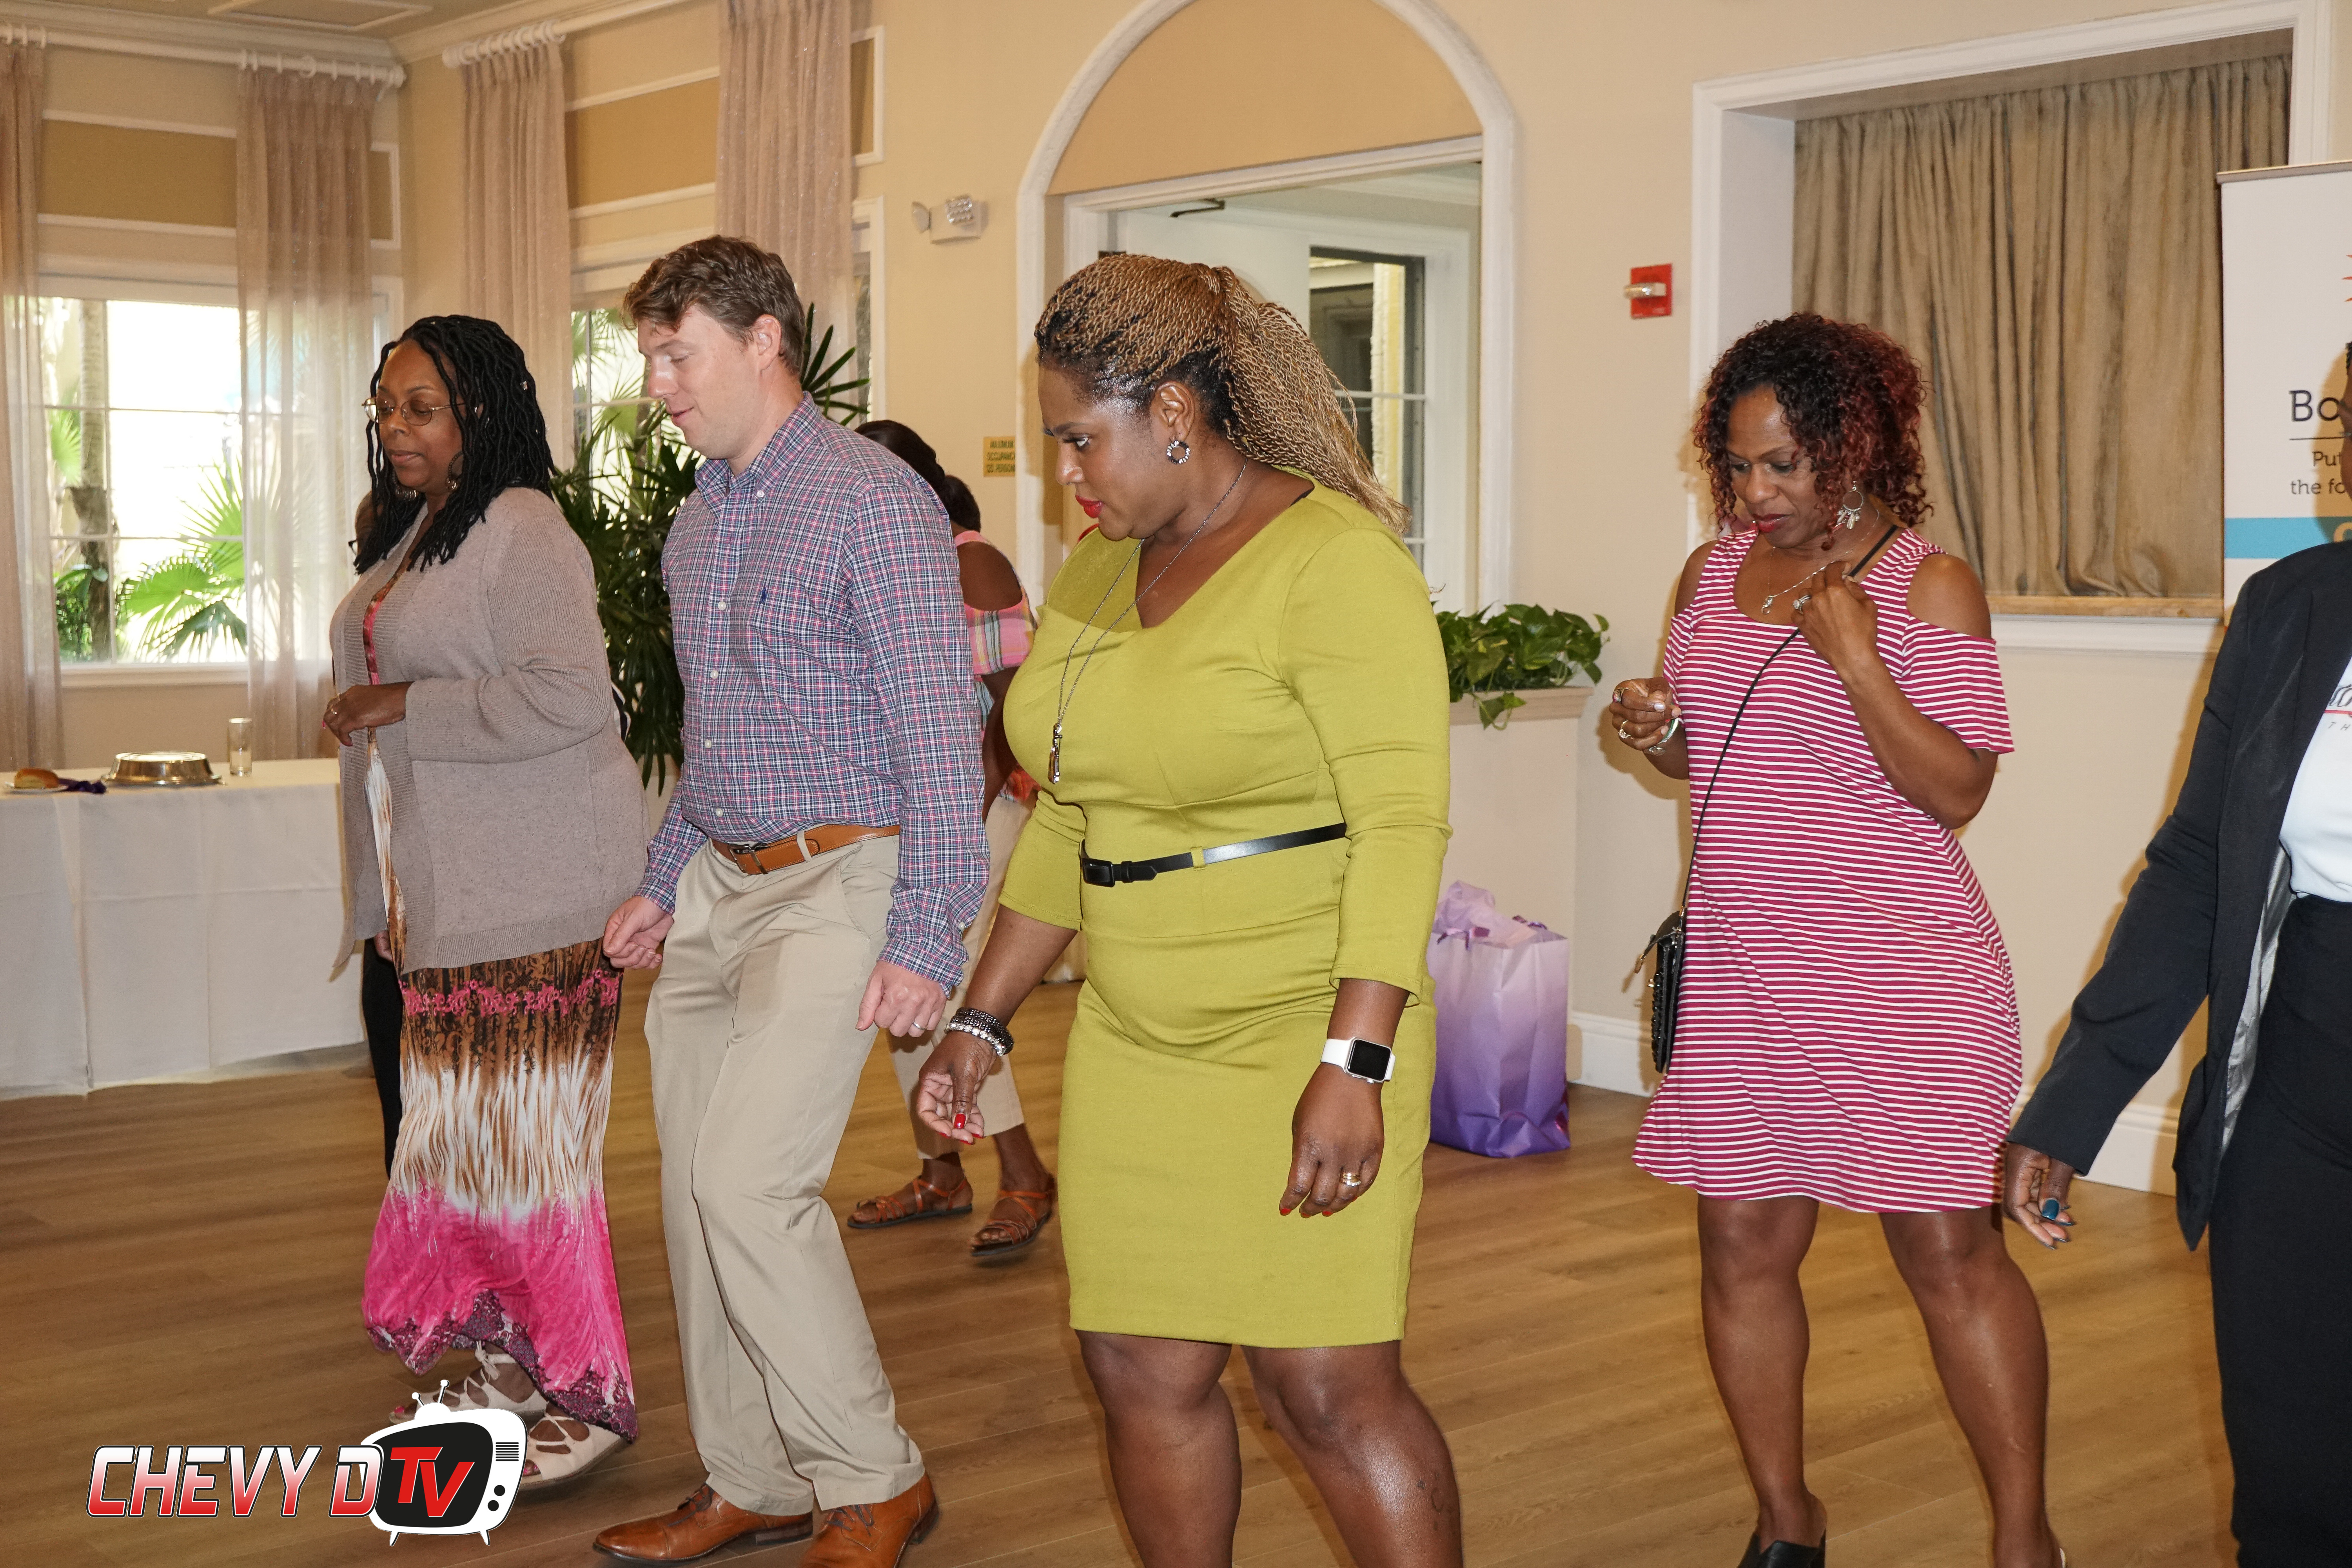 Caregivers’ Recognition Luncheon Delivered Laughs, Dancing and Relaxation